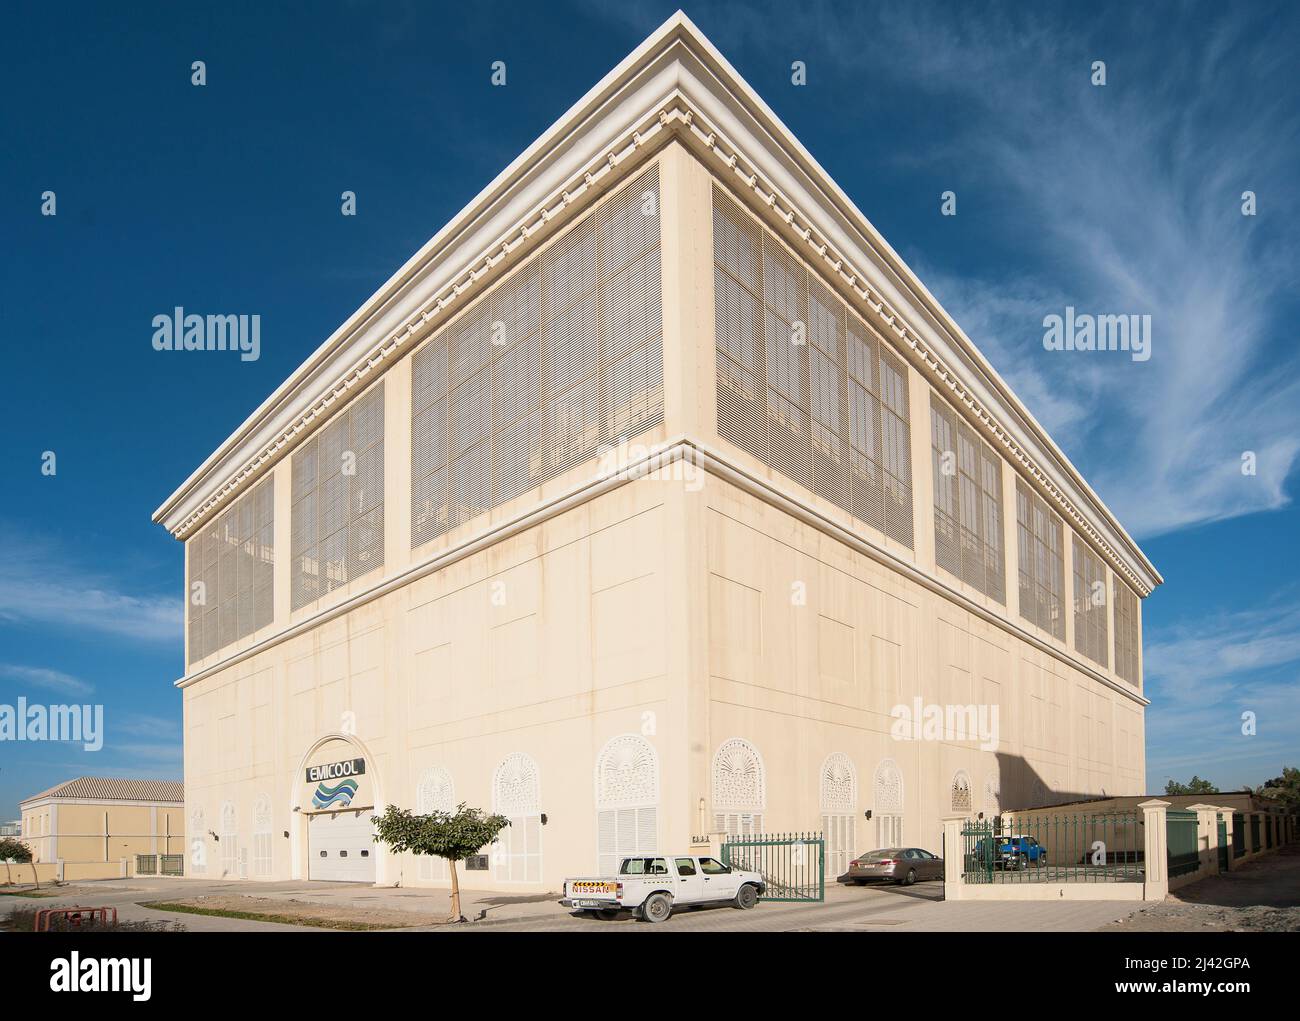 ndustrial architecture design - district cooling plant Stock Photo